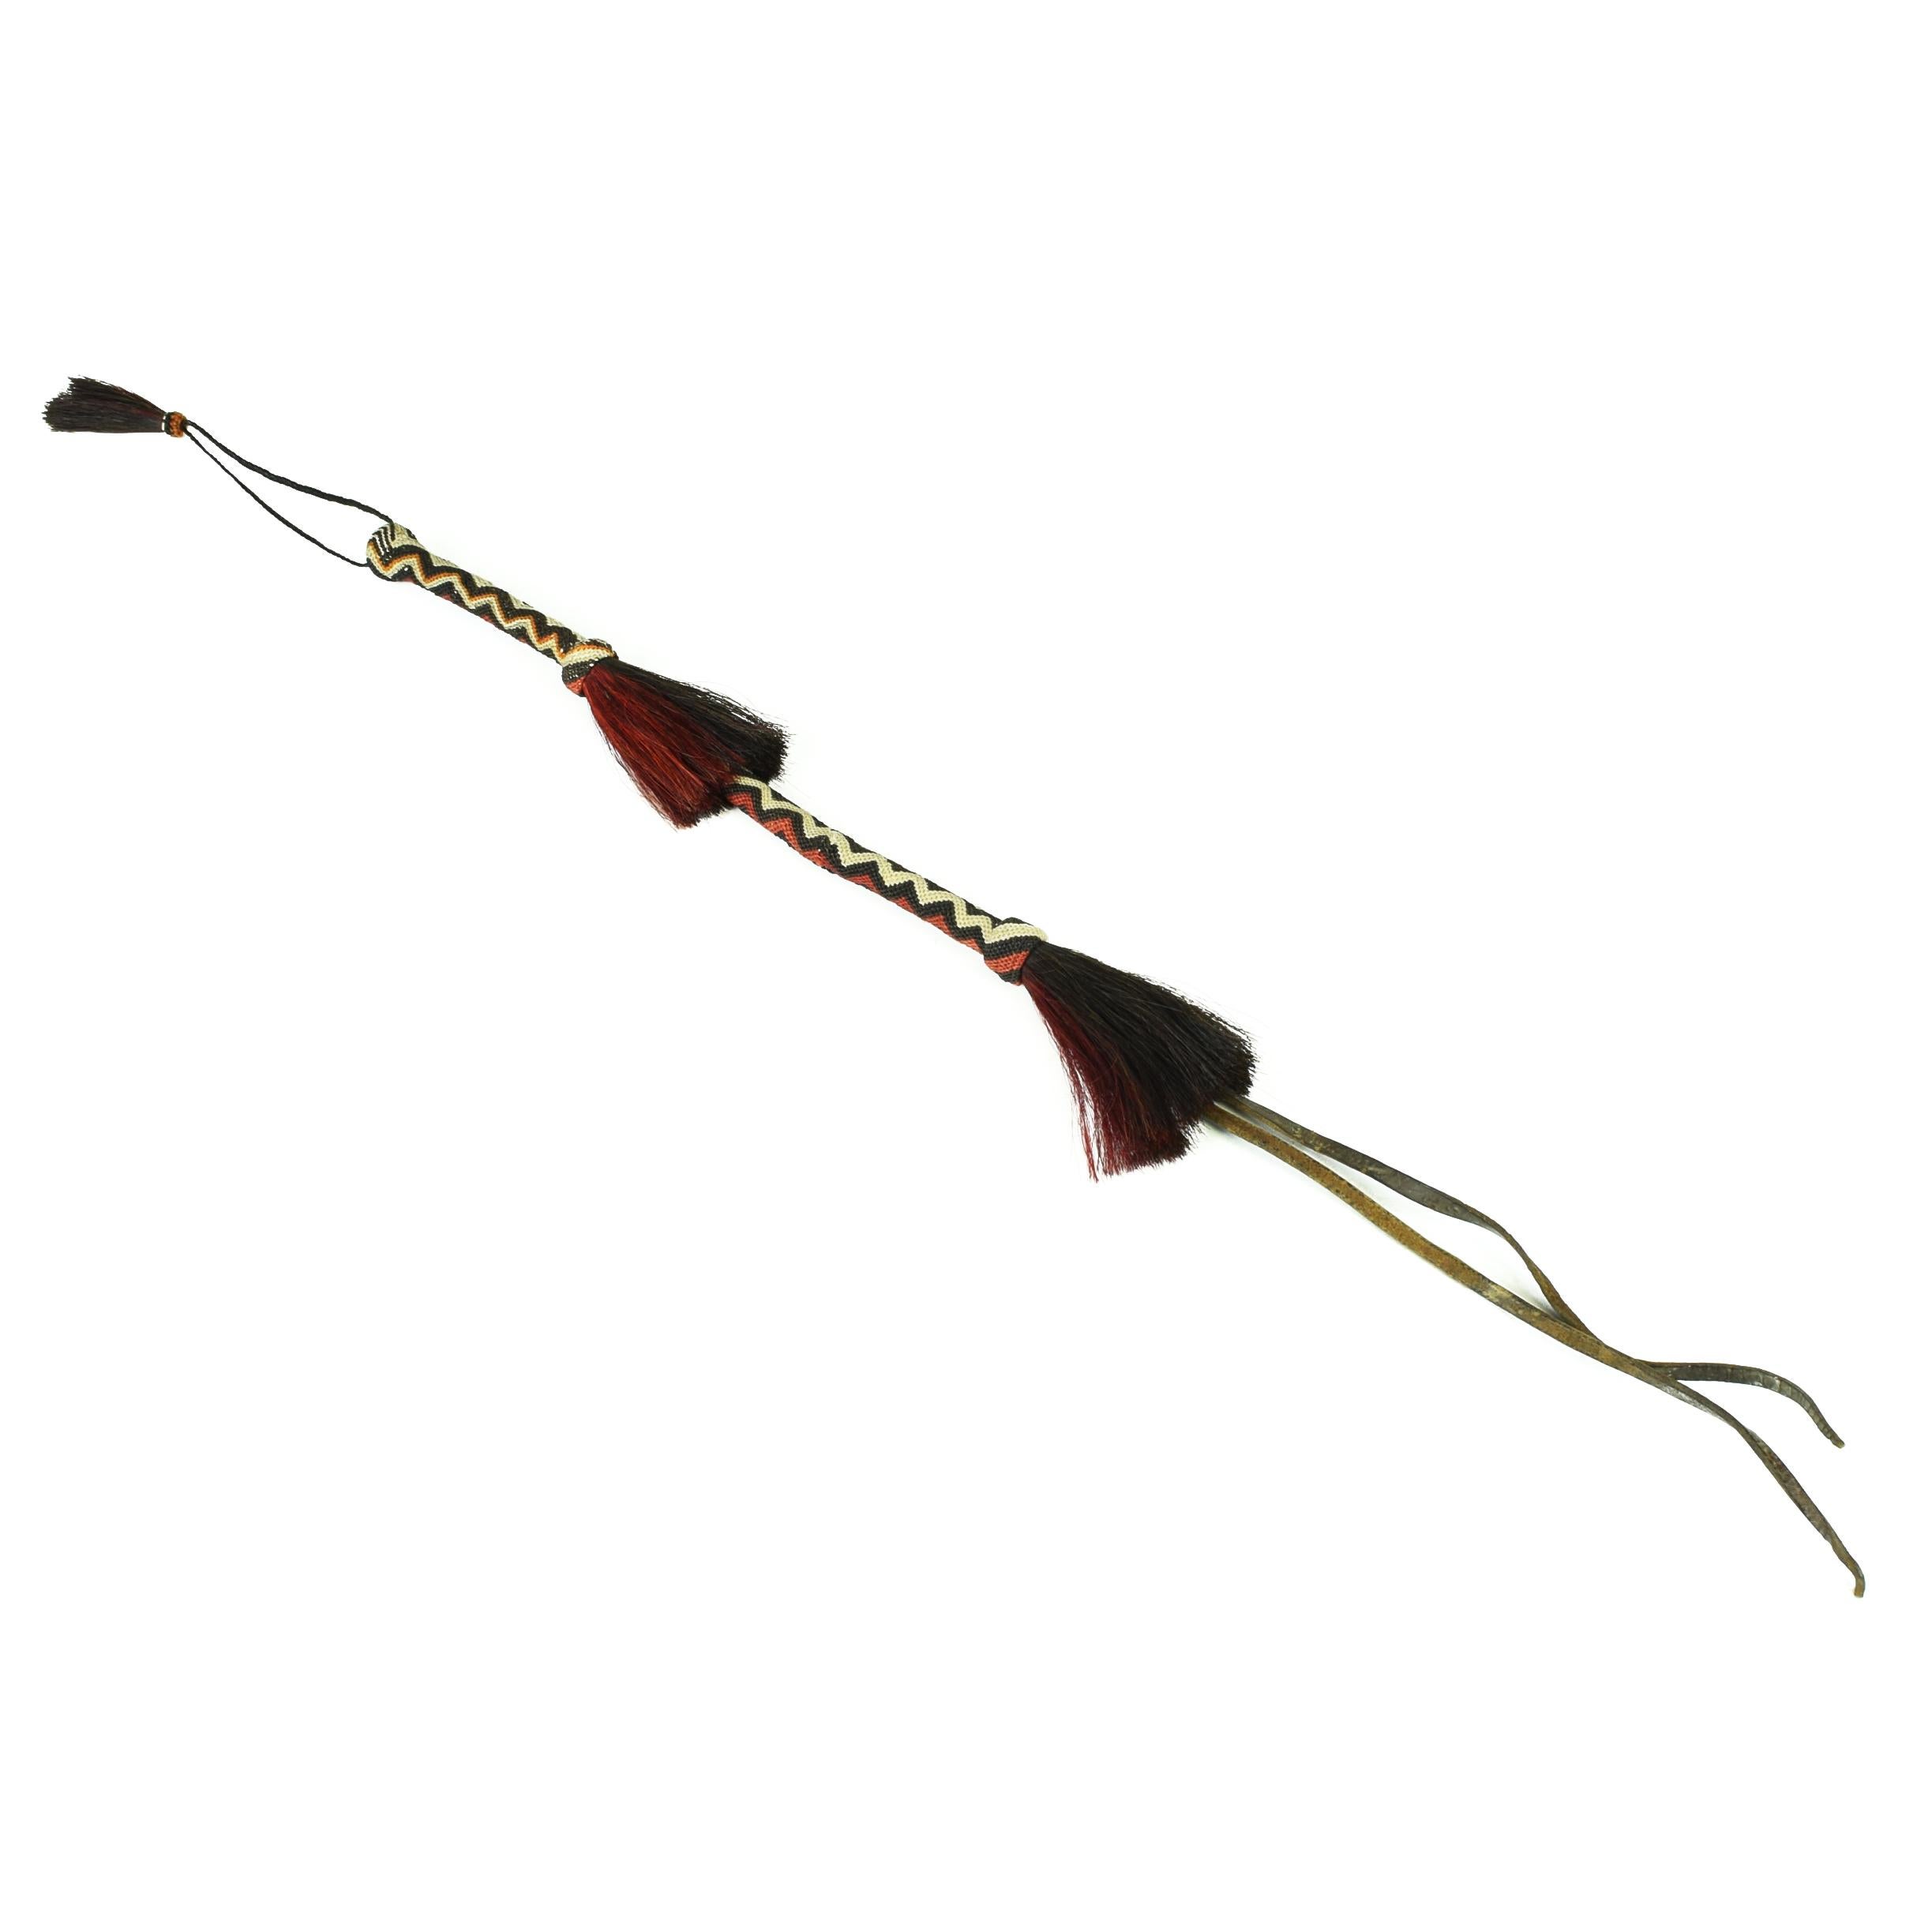 Deer Lodge Prison quirt with red, black, and white dyed horsehair and horsehair hand strap. Quirt: 16